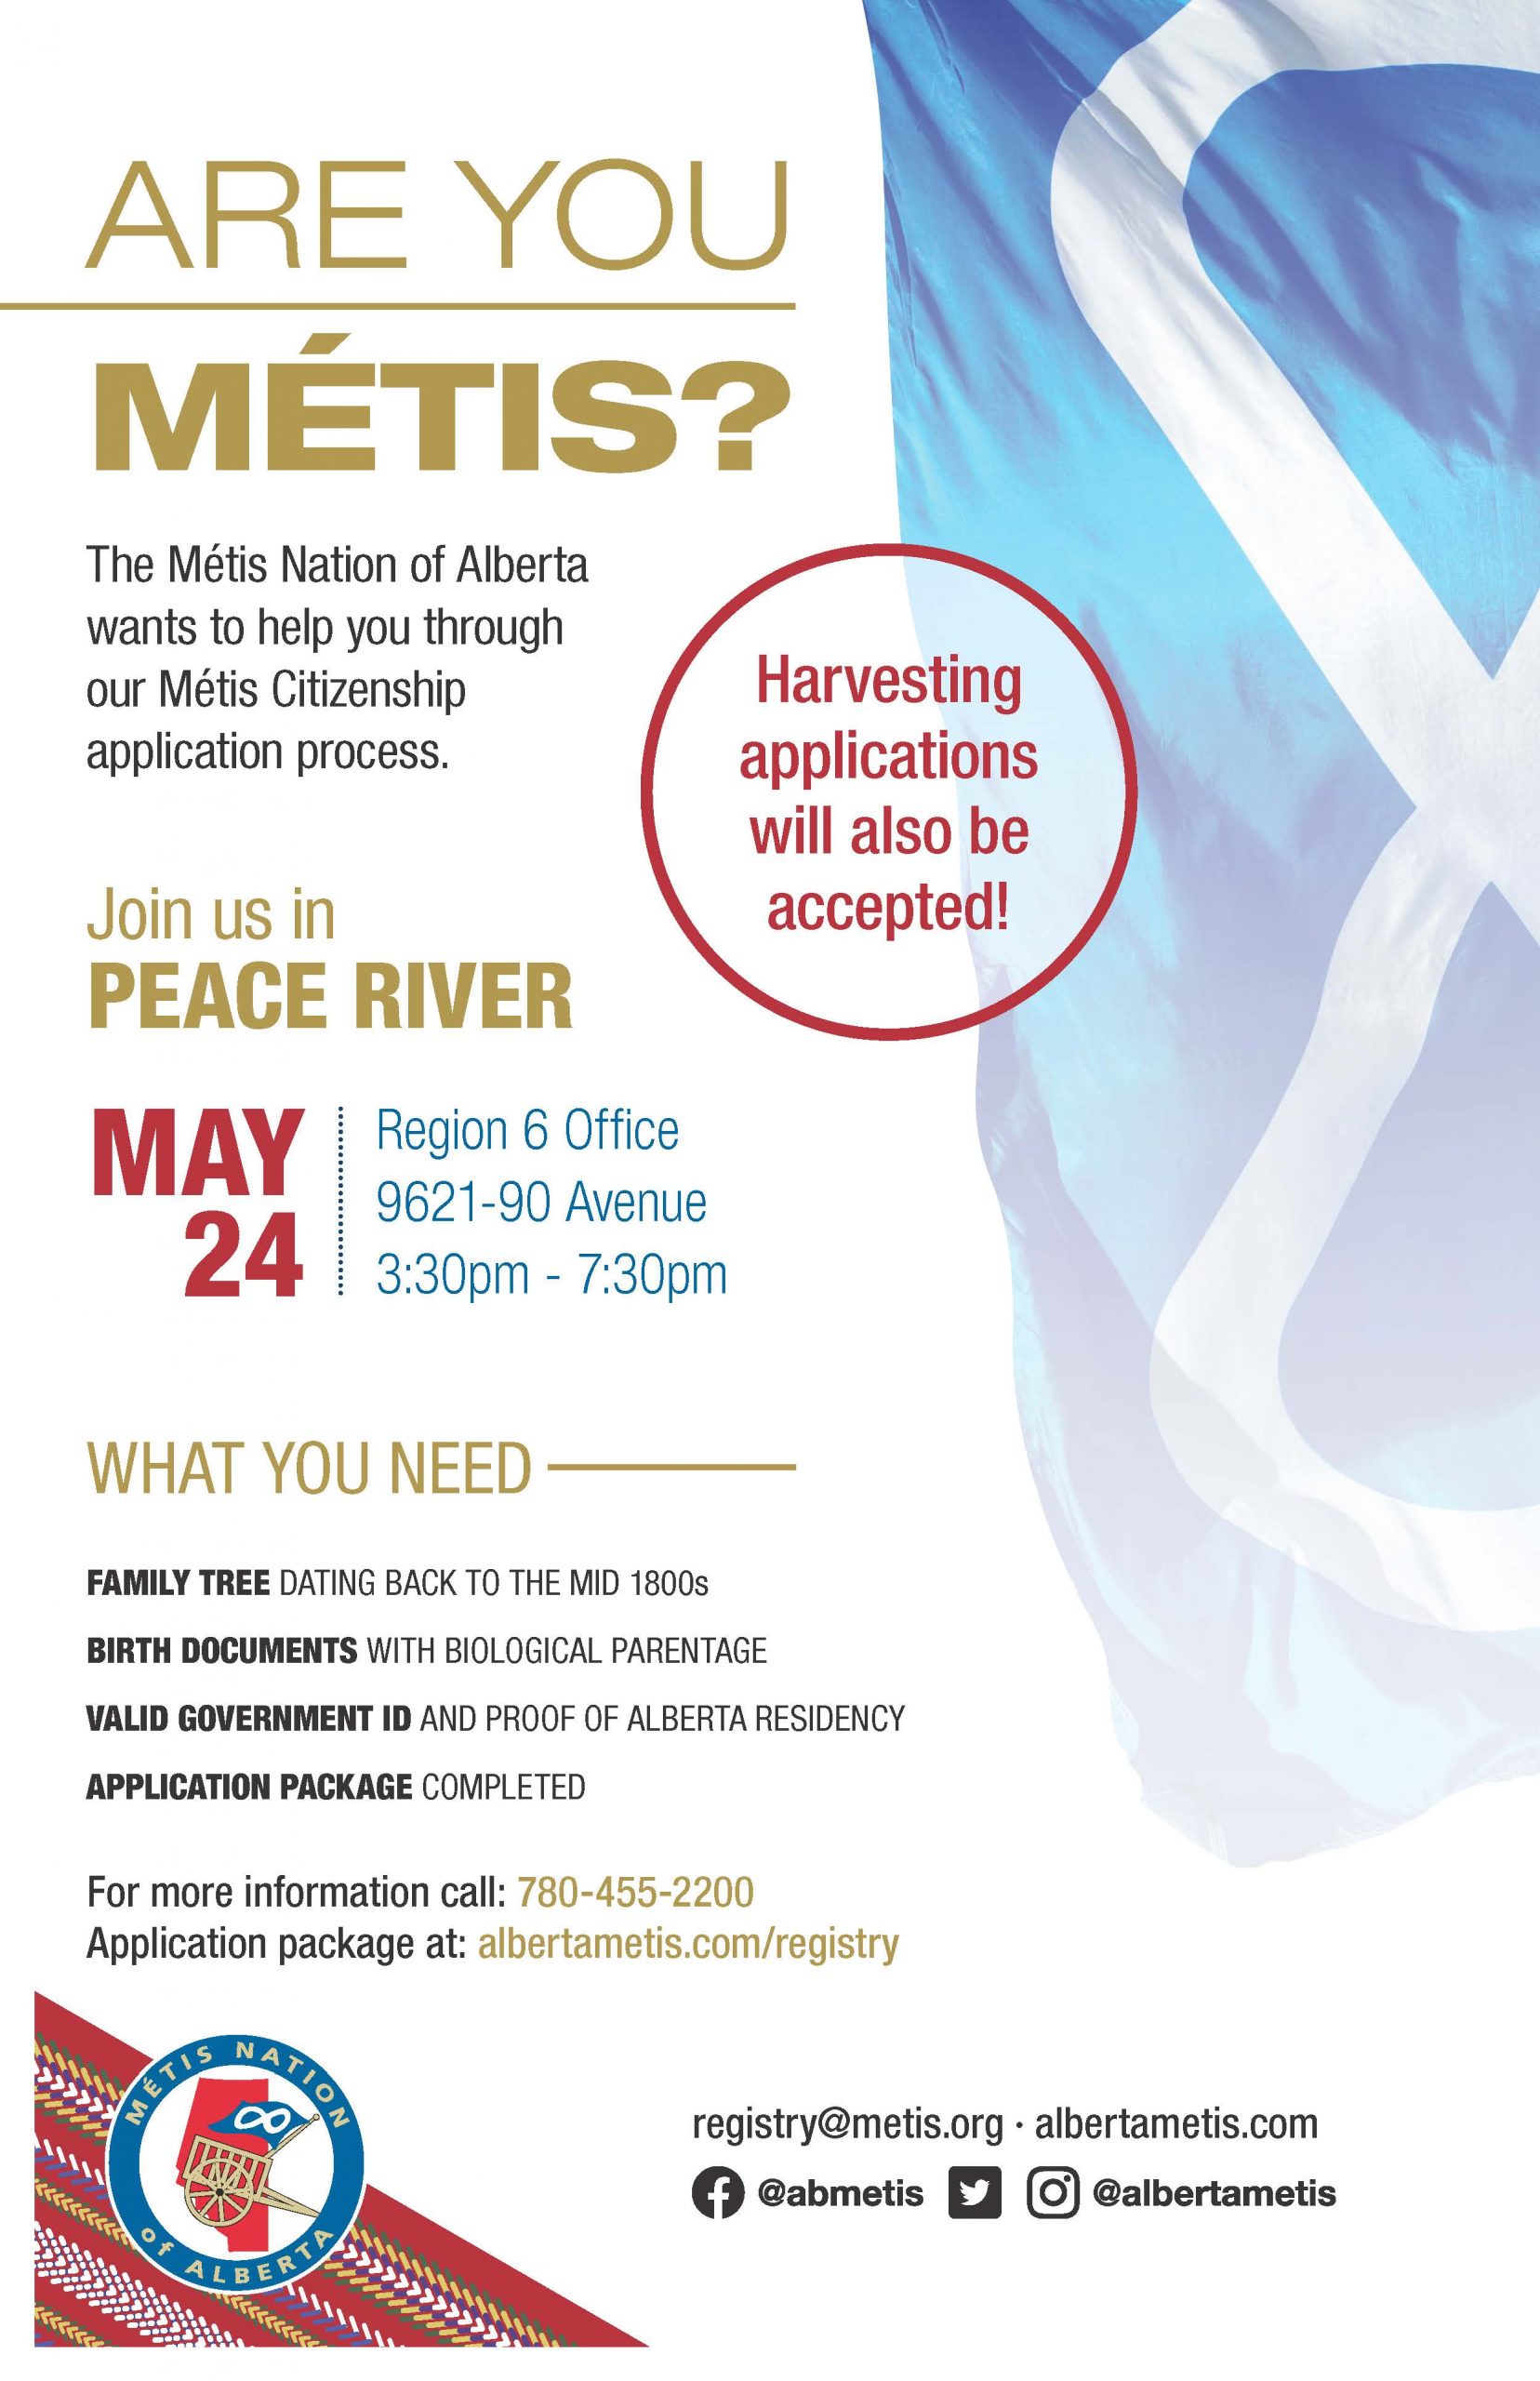 Are you Métis? The Metis Nation of Alberta wants to help you through our Metis Citizenship application process. Join us in Peace River May 24 at the Region 6 Office located at 9621-90 Avenue from 3:30 p.m. to 7:30 p.m. What you need: A family tree dating back to the mid 1800s, Birth Documents with biological parentage, valid government id and proof of Alberta residency, and an application package completed. For more information call: 780 455 2200. Application package at albertametis.com/registry. Harvesting applications will also be accepted.